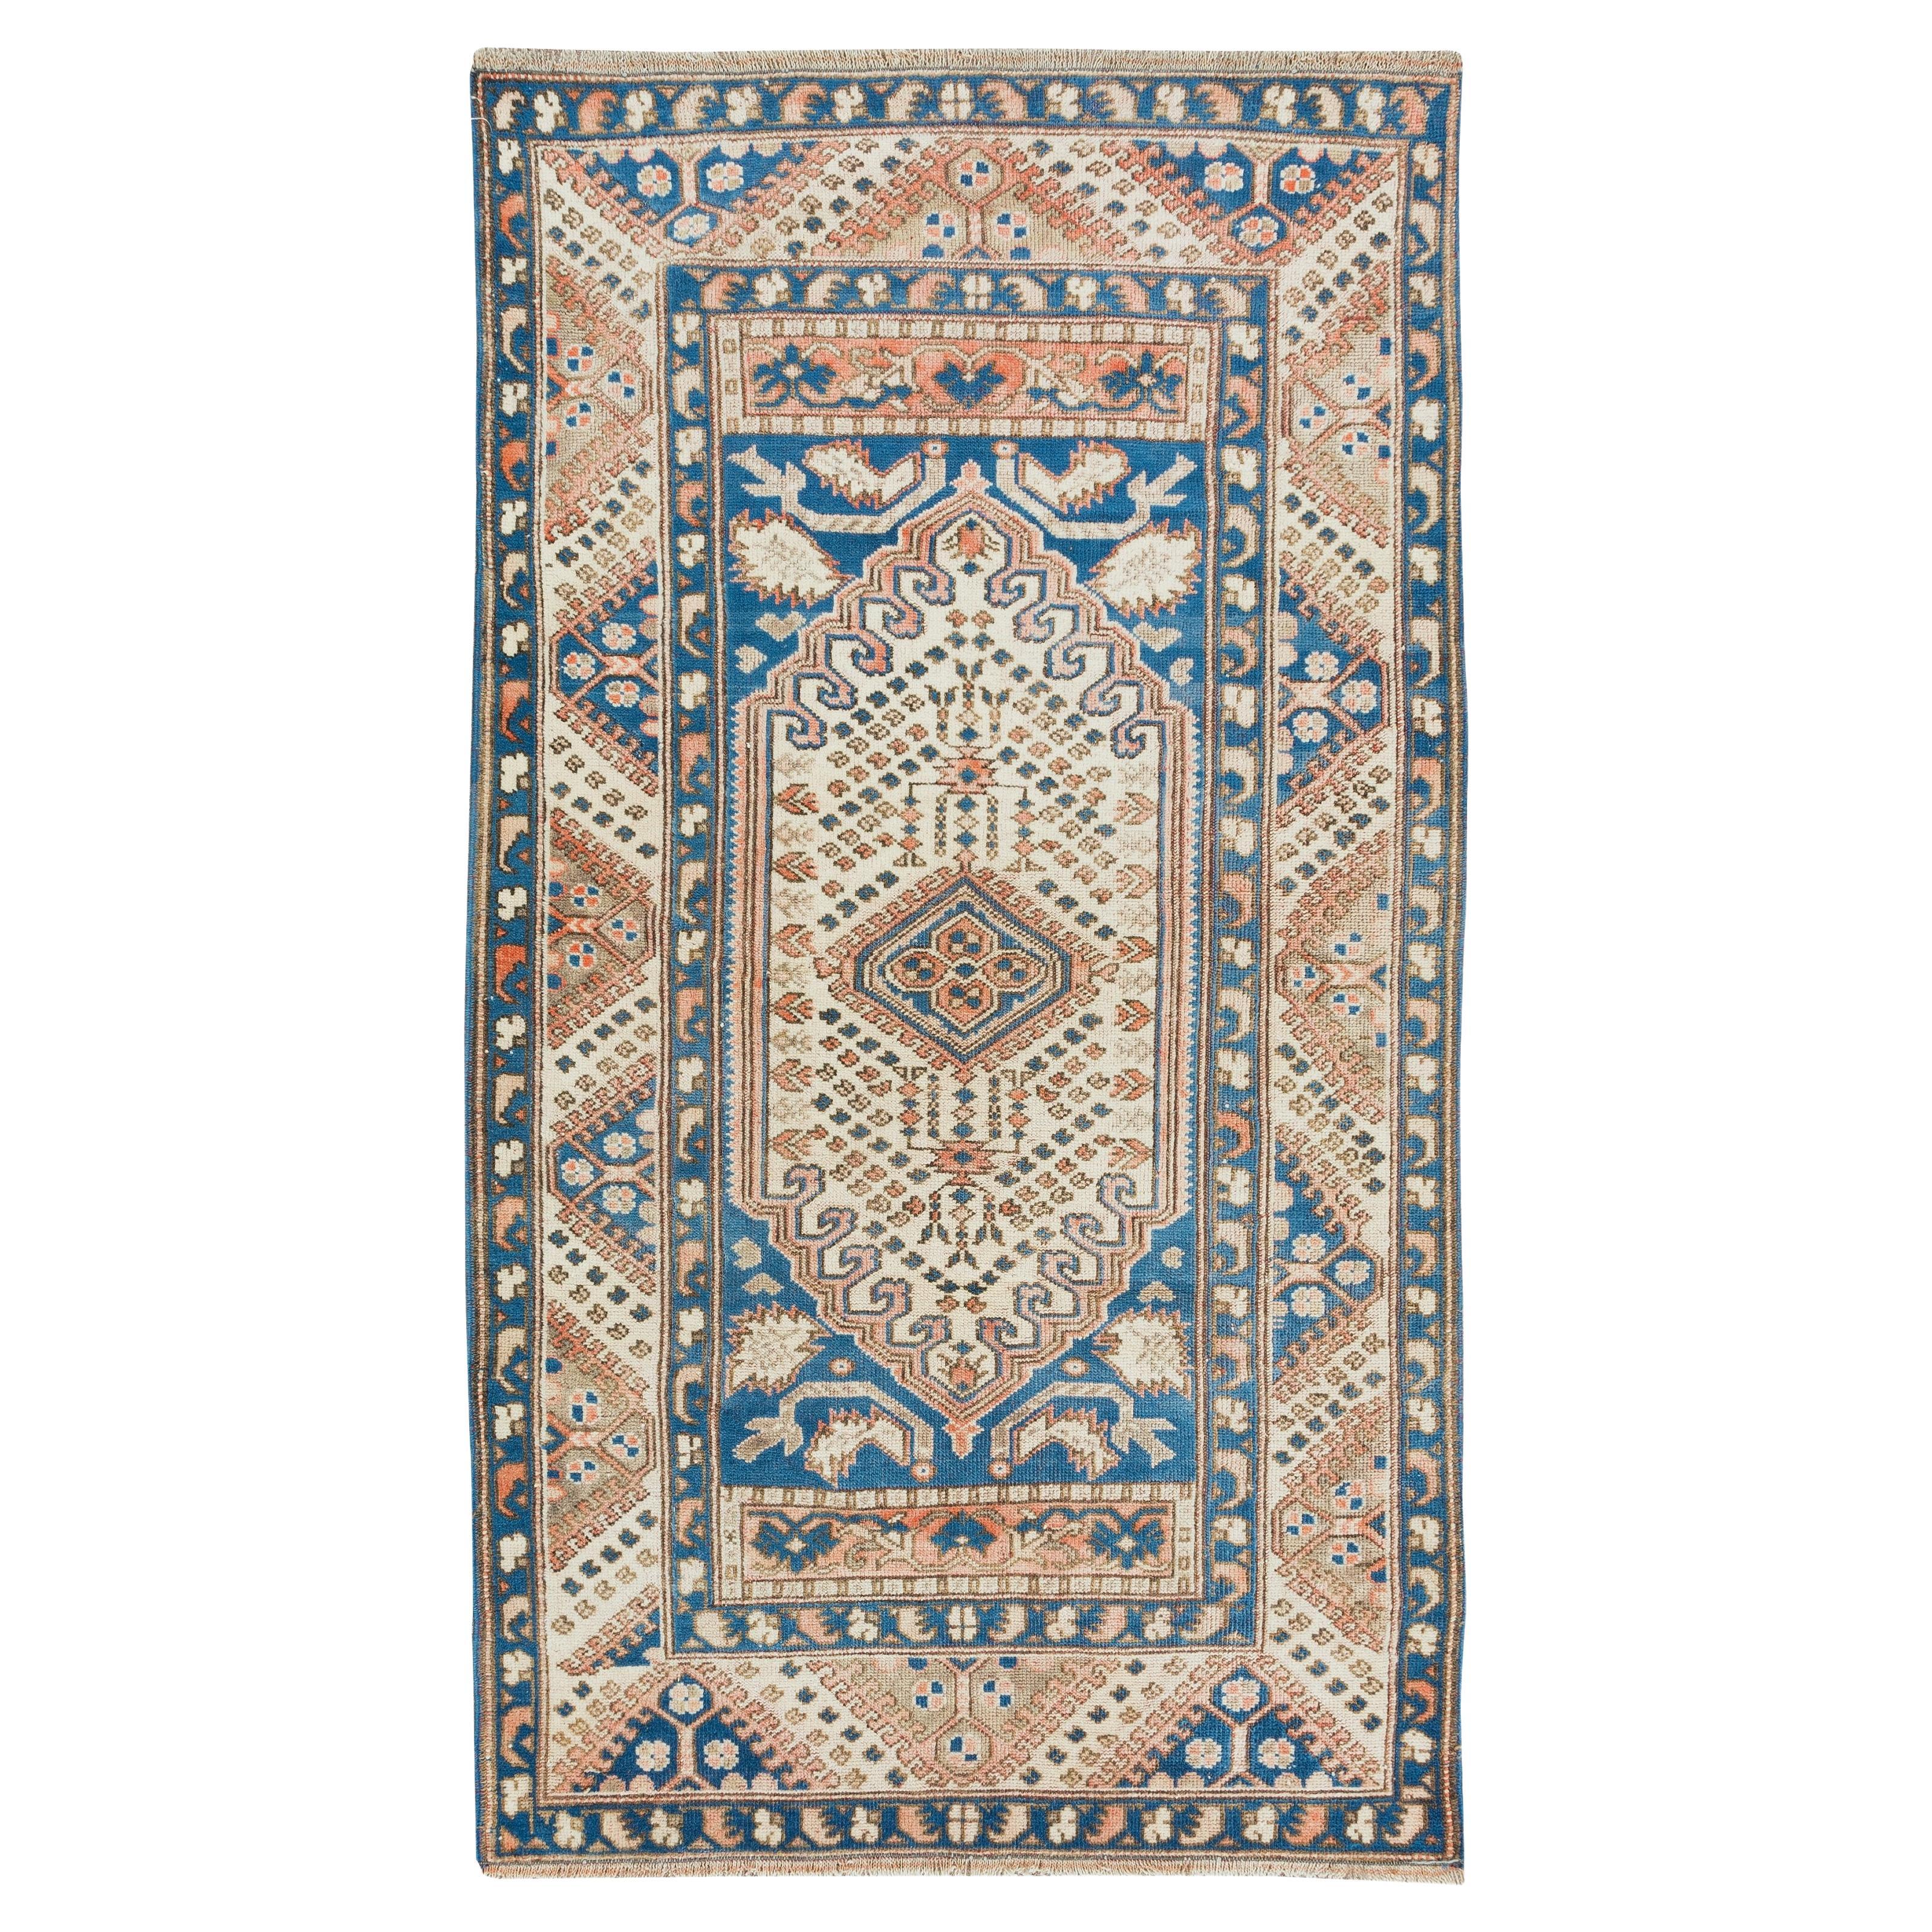 3.4x6.3 Ft Traditional Geometric Turkish Accent Rug. Vintage Handmade Carpet For Sale